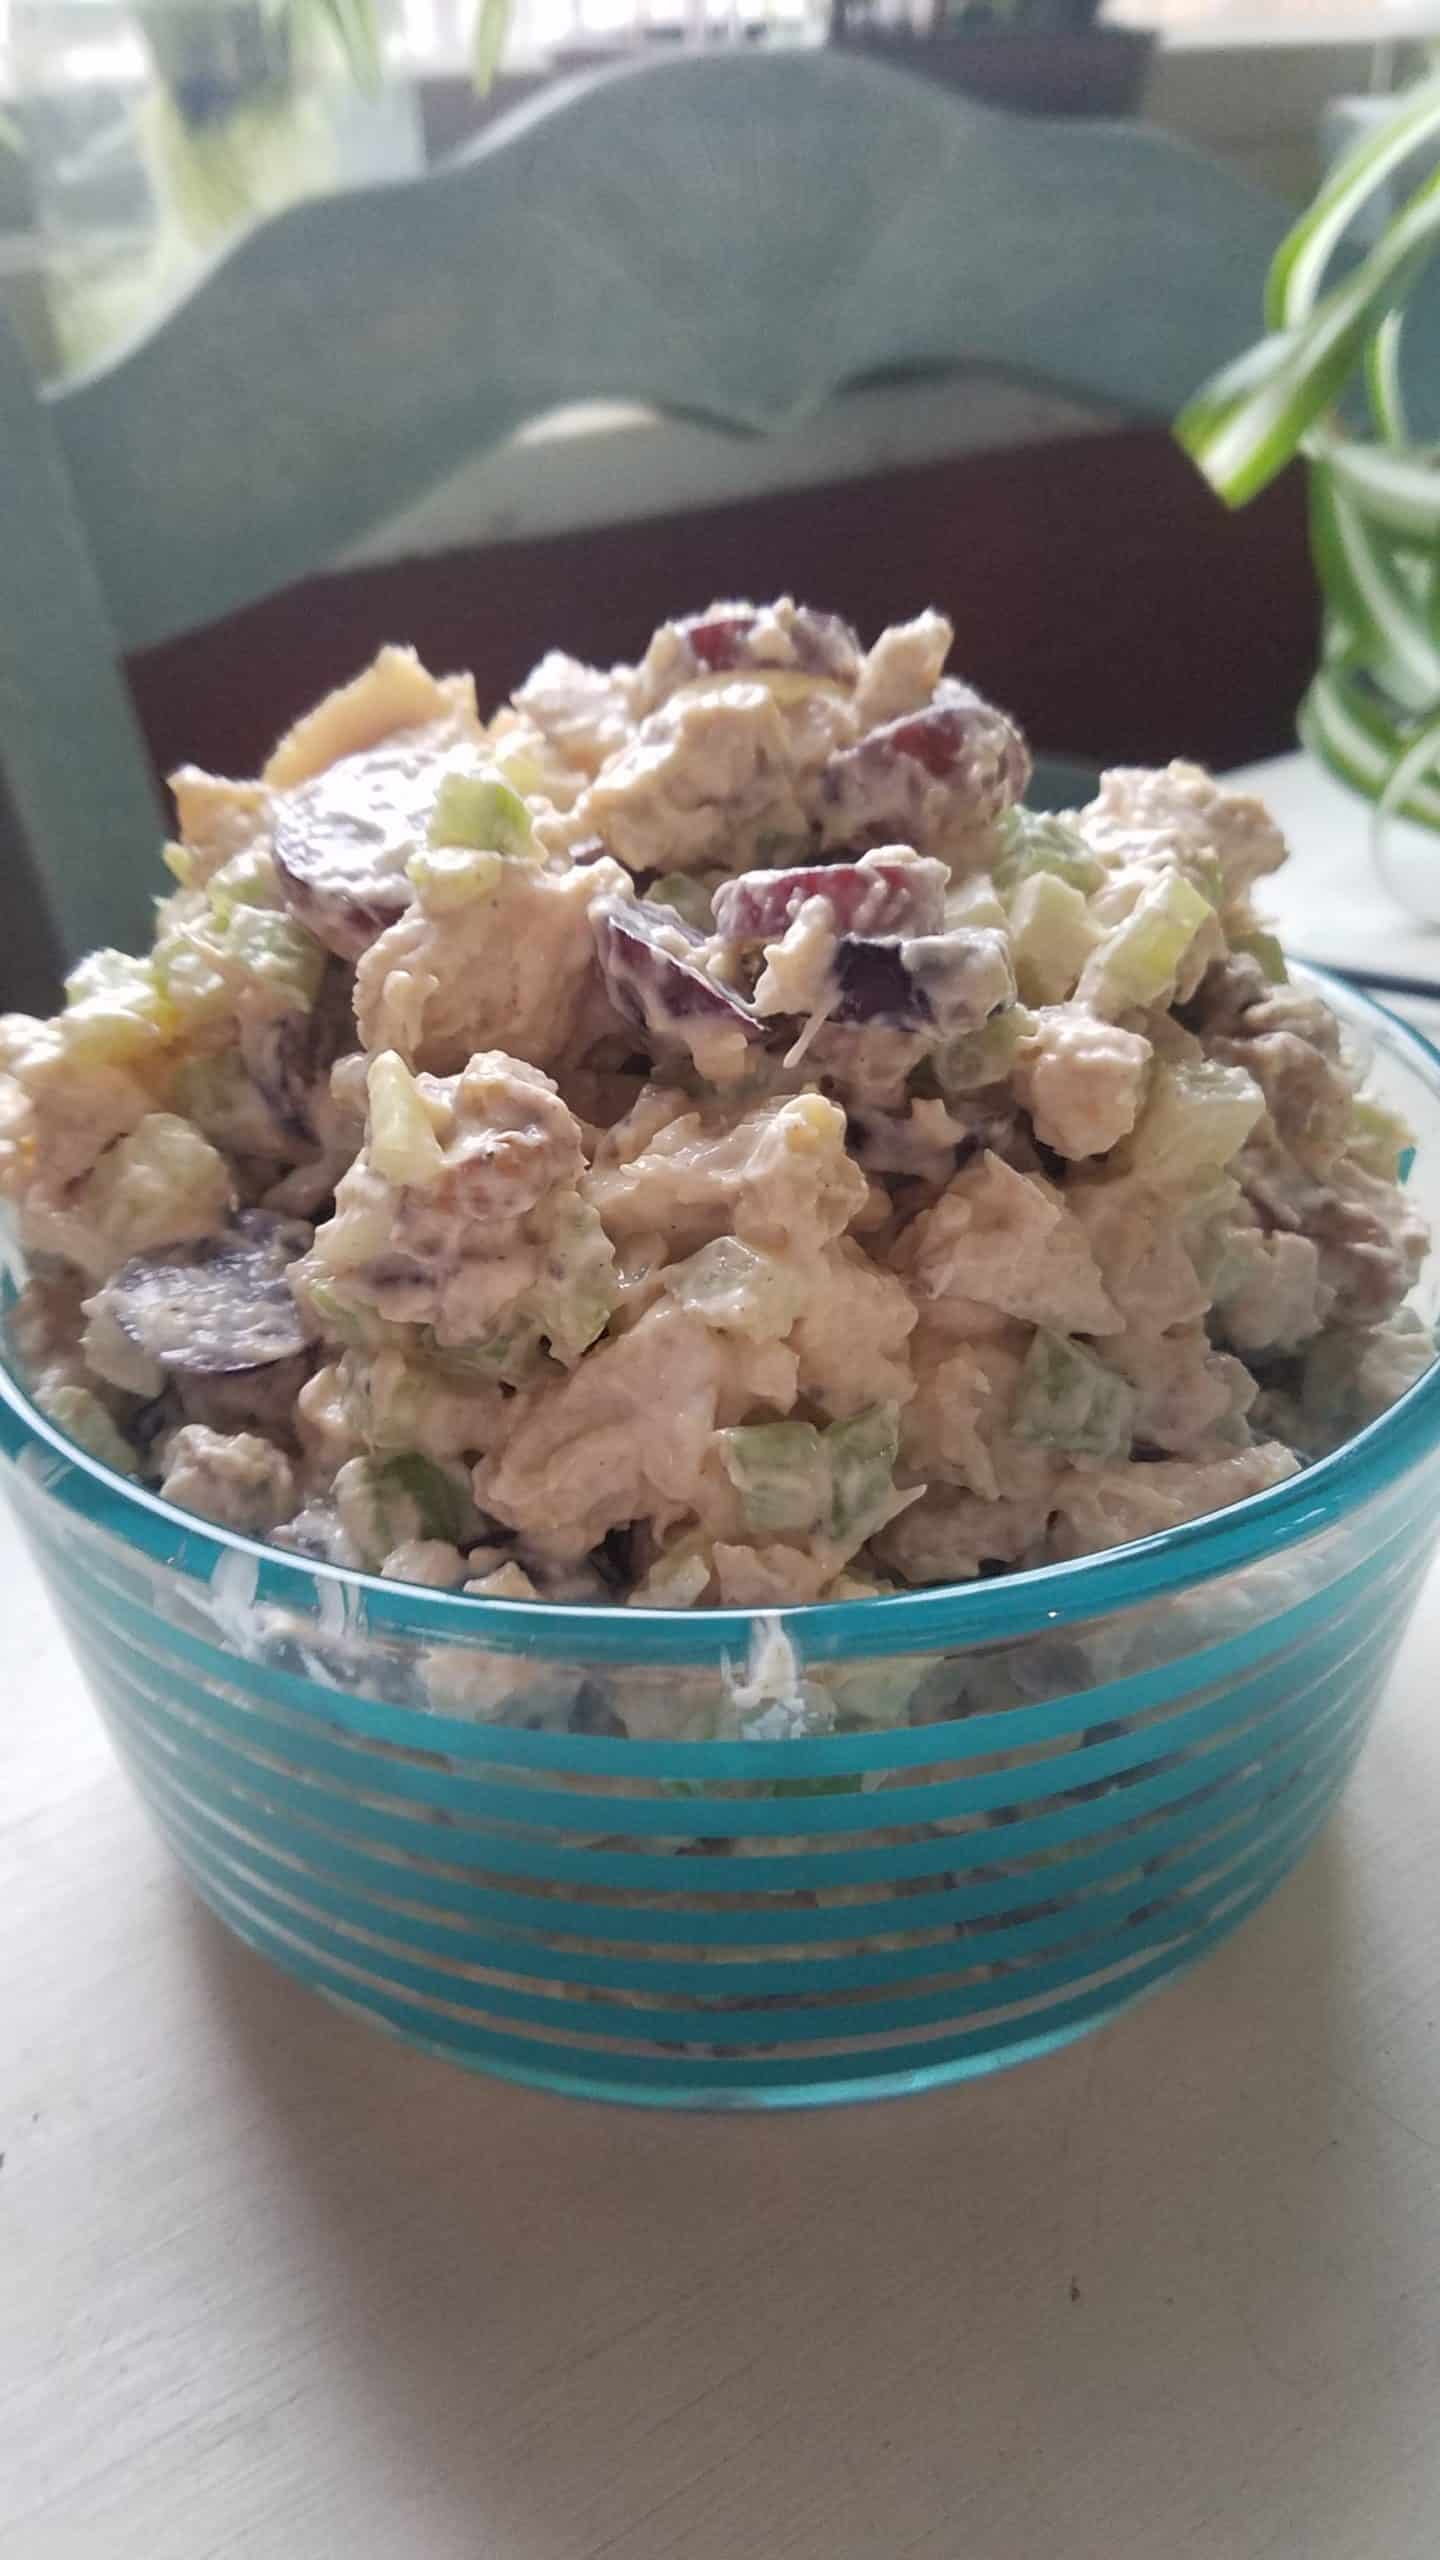 Chicken Salad with Grapes, Walnuts & Celery